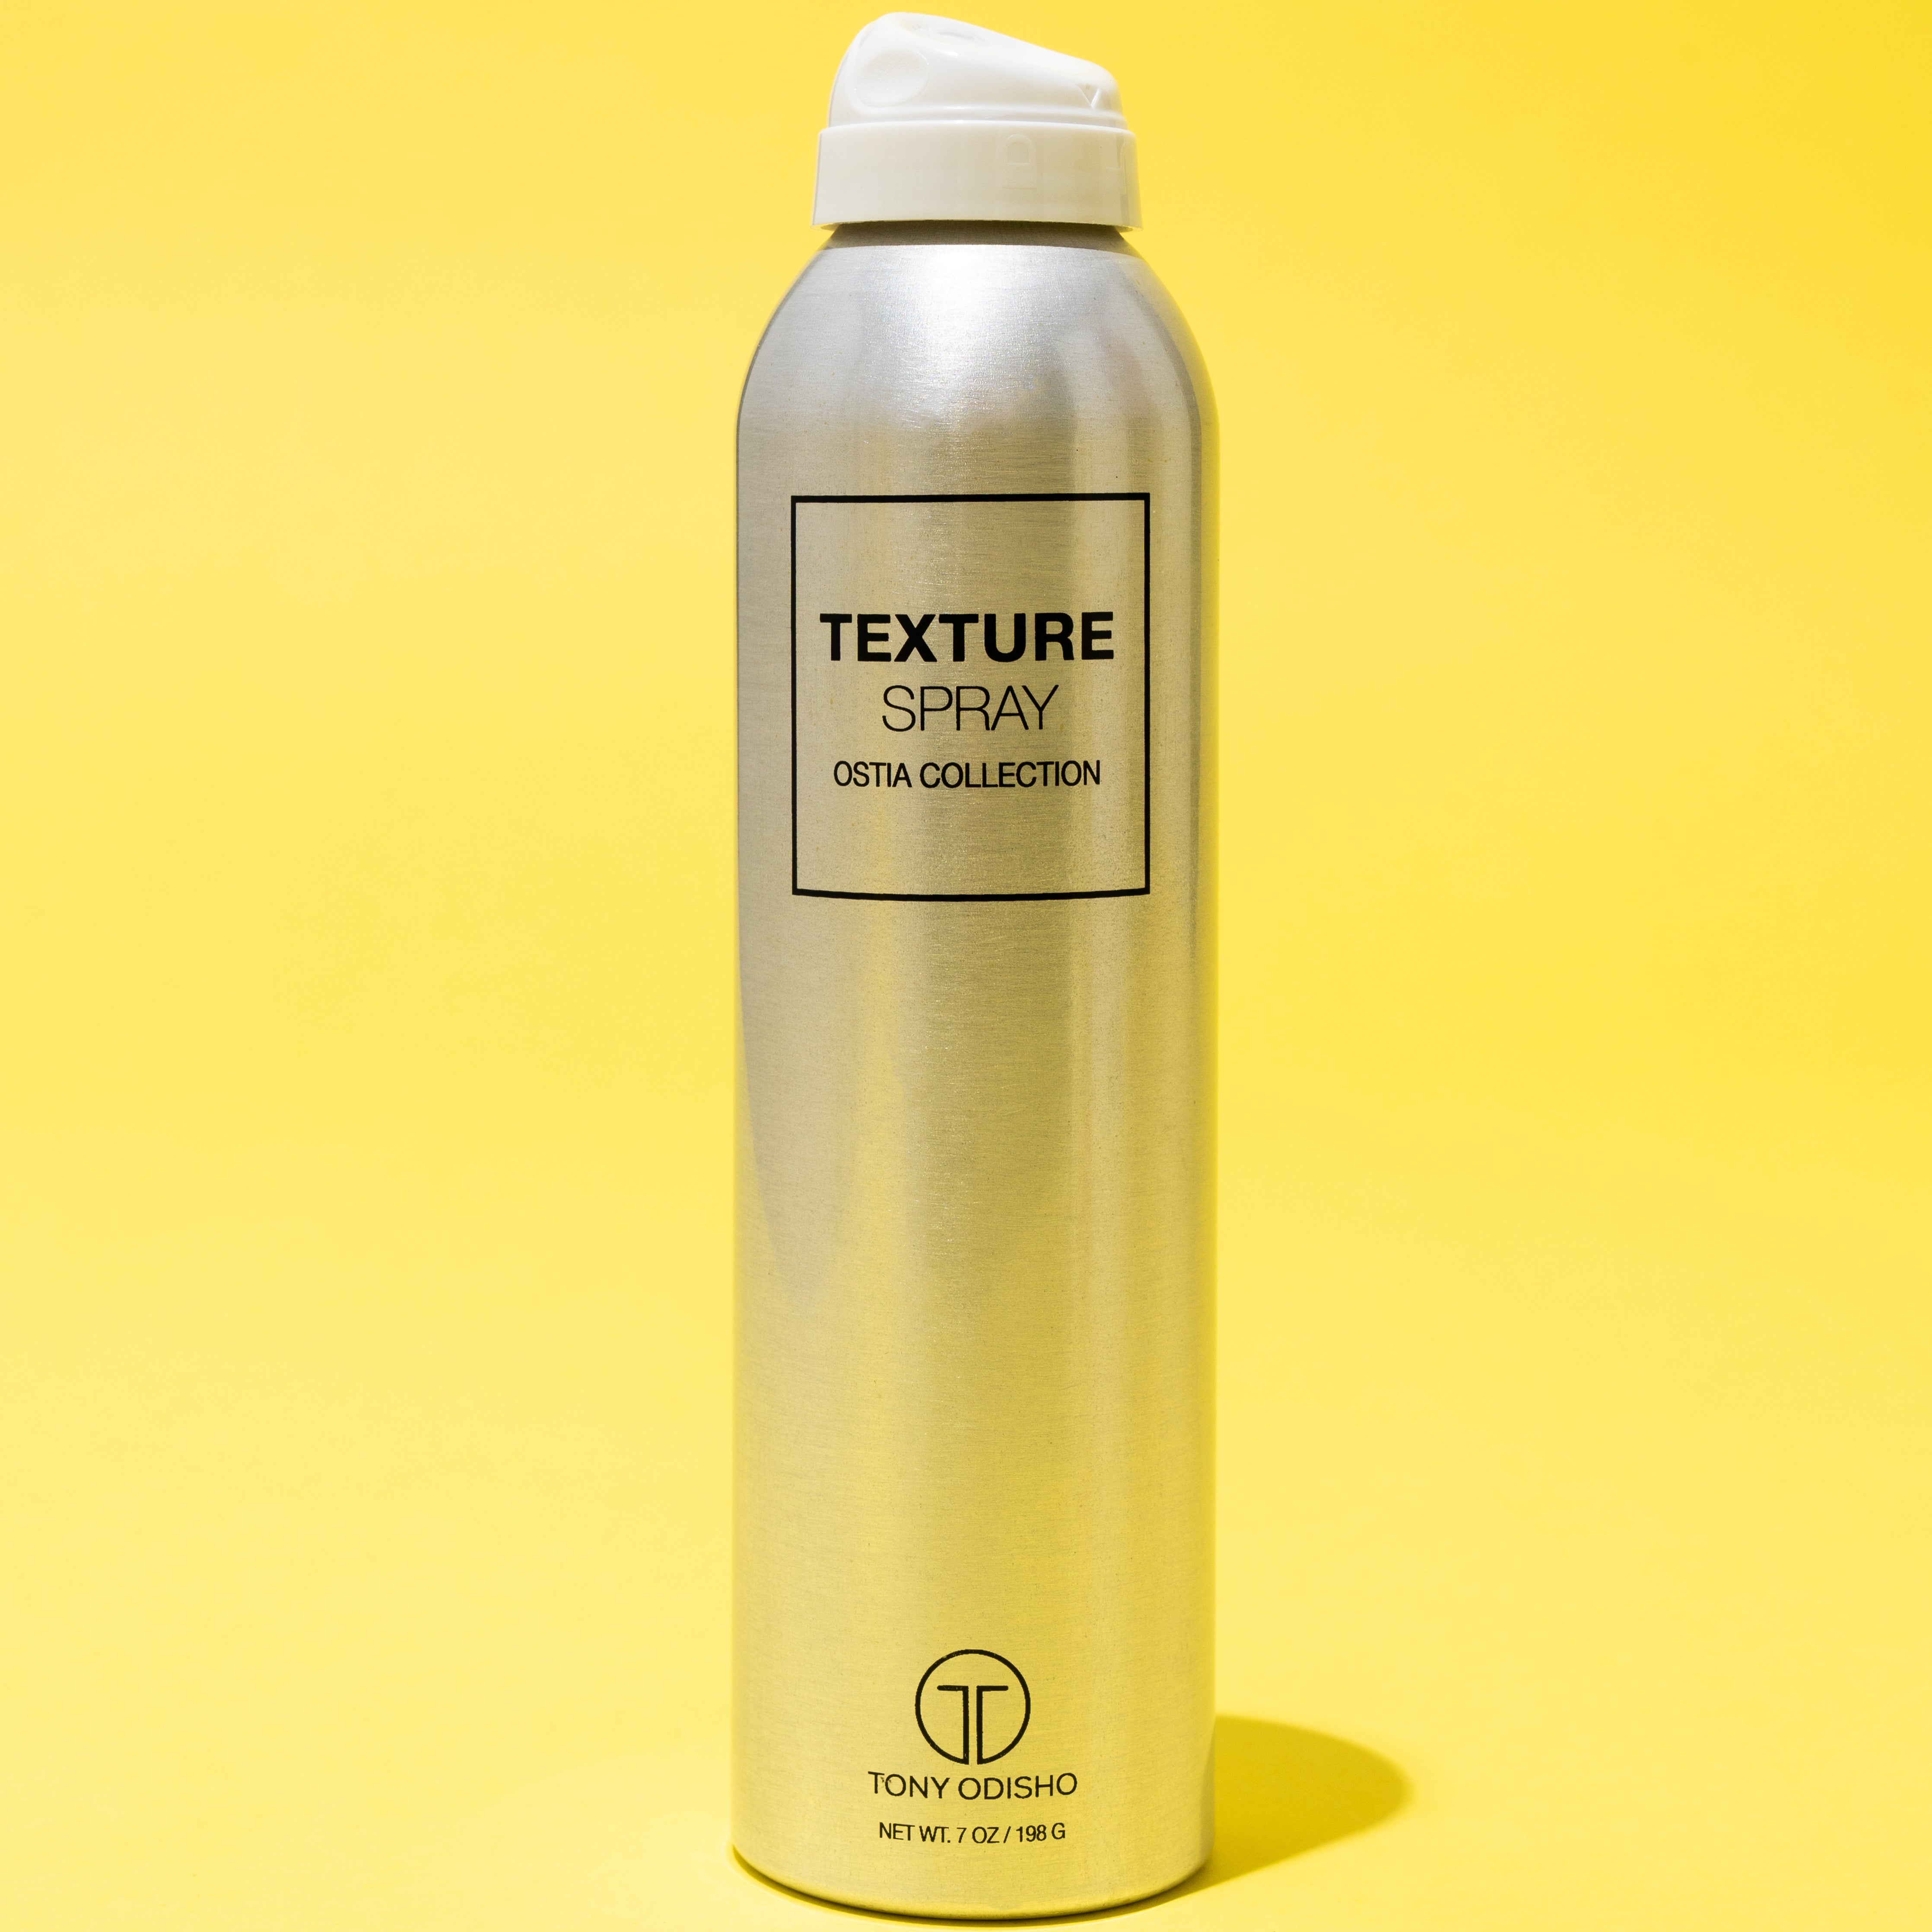 Ostia Collection Texture Spray 7oz | Adds texture to create dimension and absorbs oils for a sleek 'undone' look | Light-hold Spray - Image 1